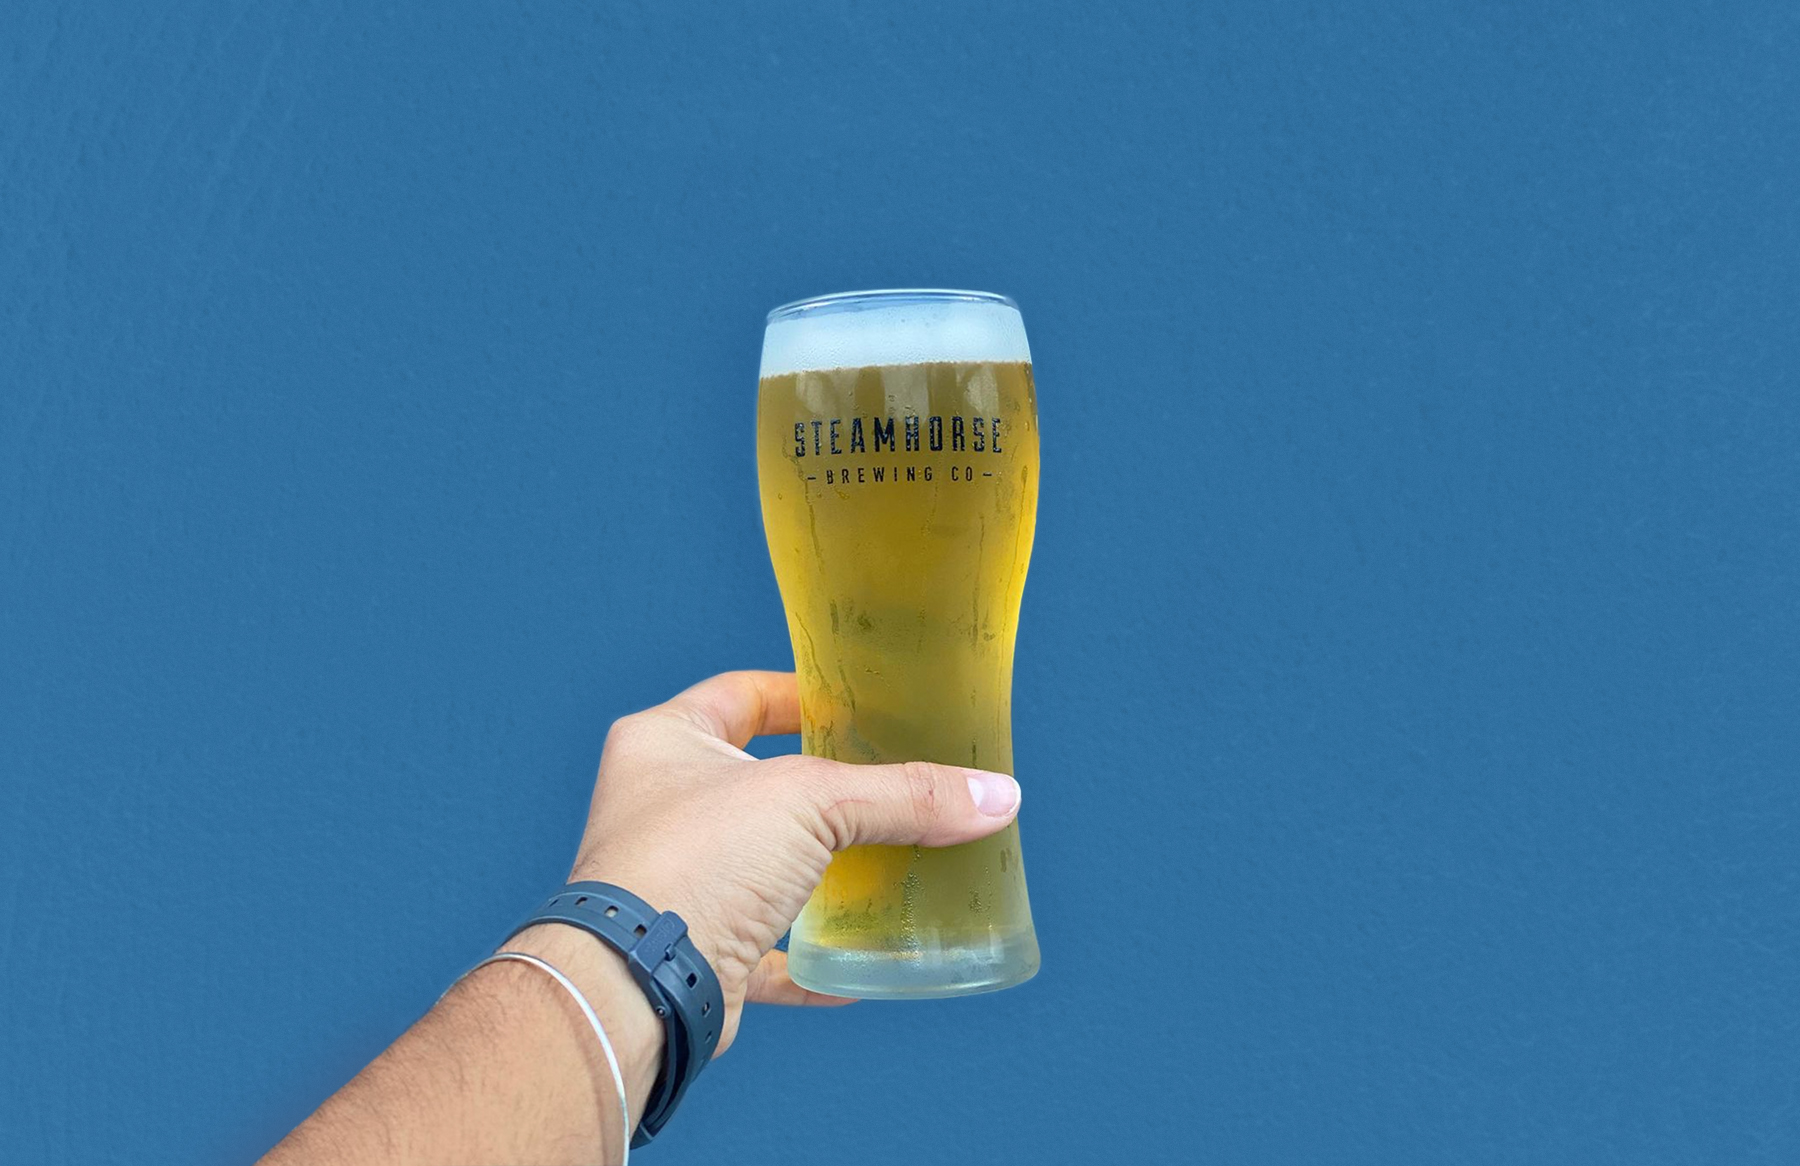 Steamhorse Brewing Co. beer mug being held agains a blue wall.